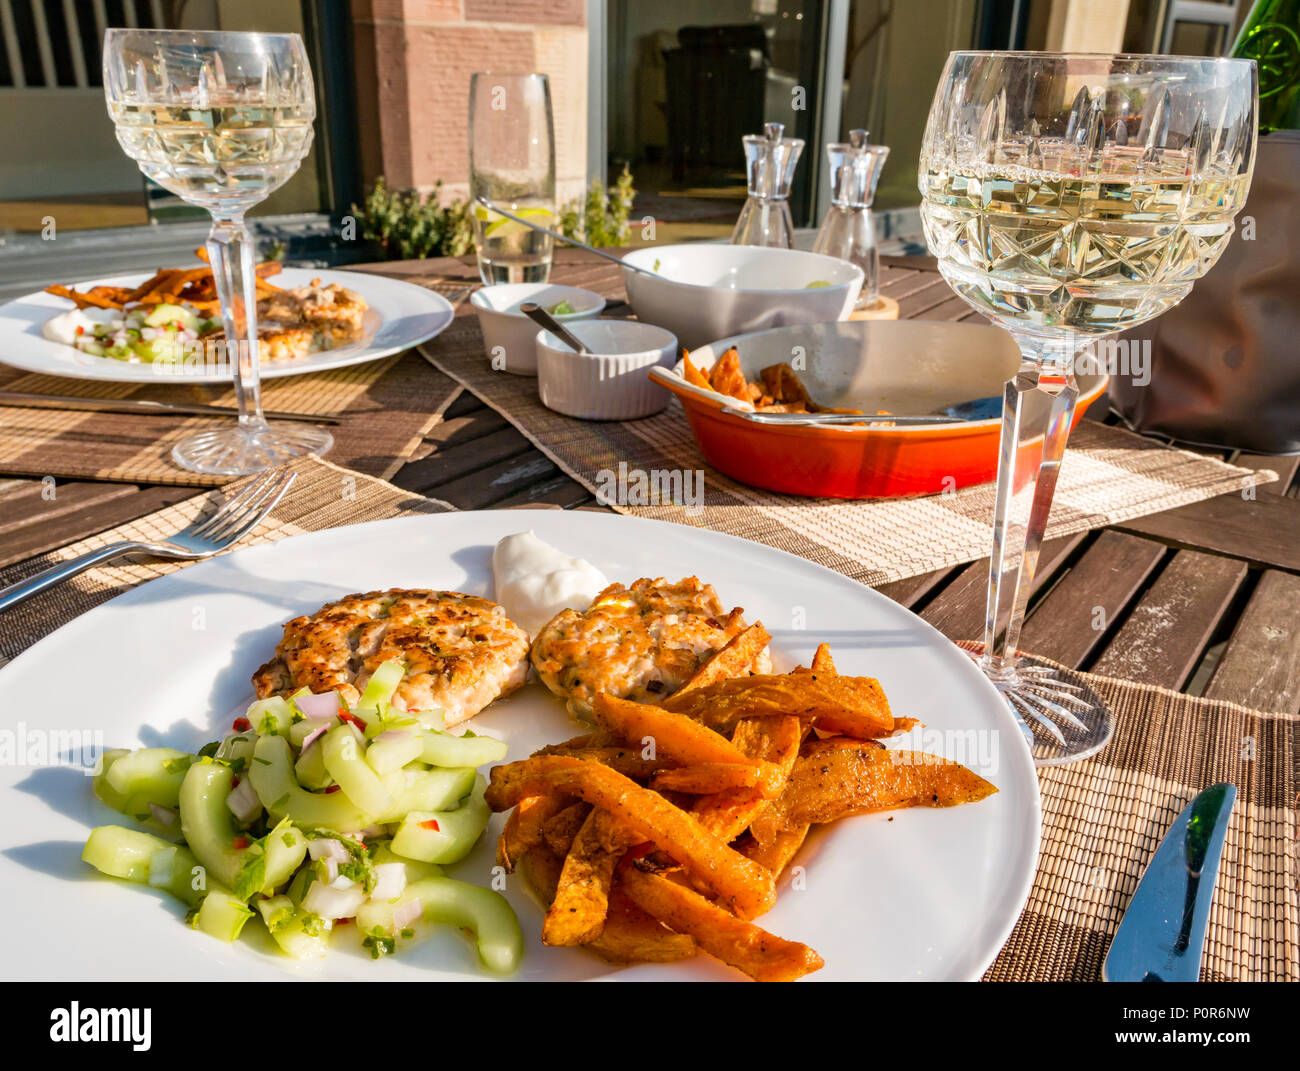 Southeast Asian food served on outdoor patio table in sunshine with crystal wine glasses filled with white wine. Salmon fishcakes, cucumber salad and sweet potato chips Stock Photo